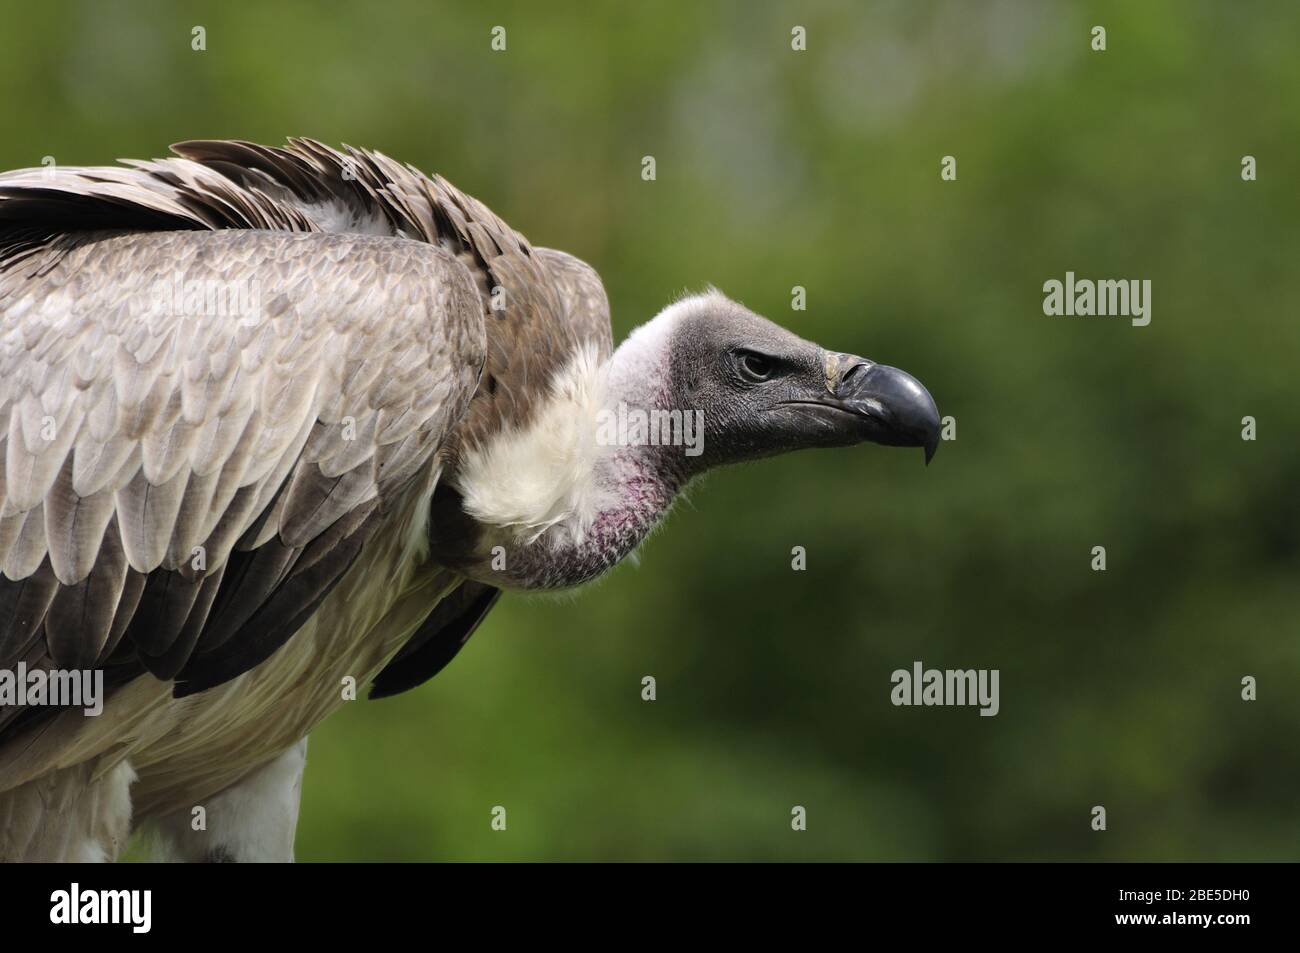 Vulture Face Portrait High Resolution Stock Photography and Images - Alamy